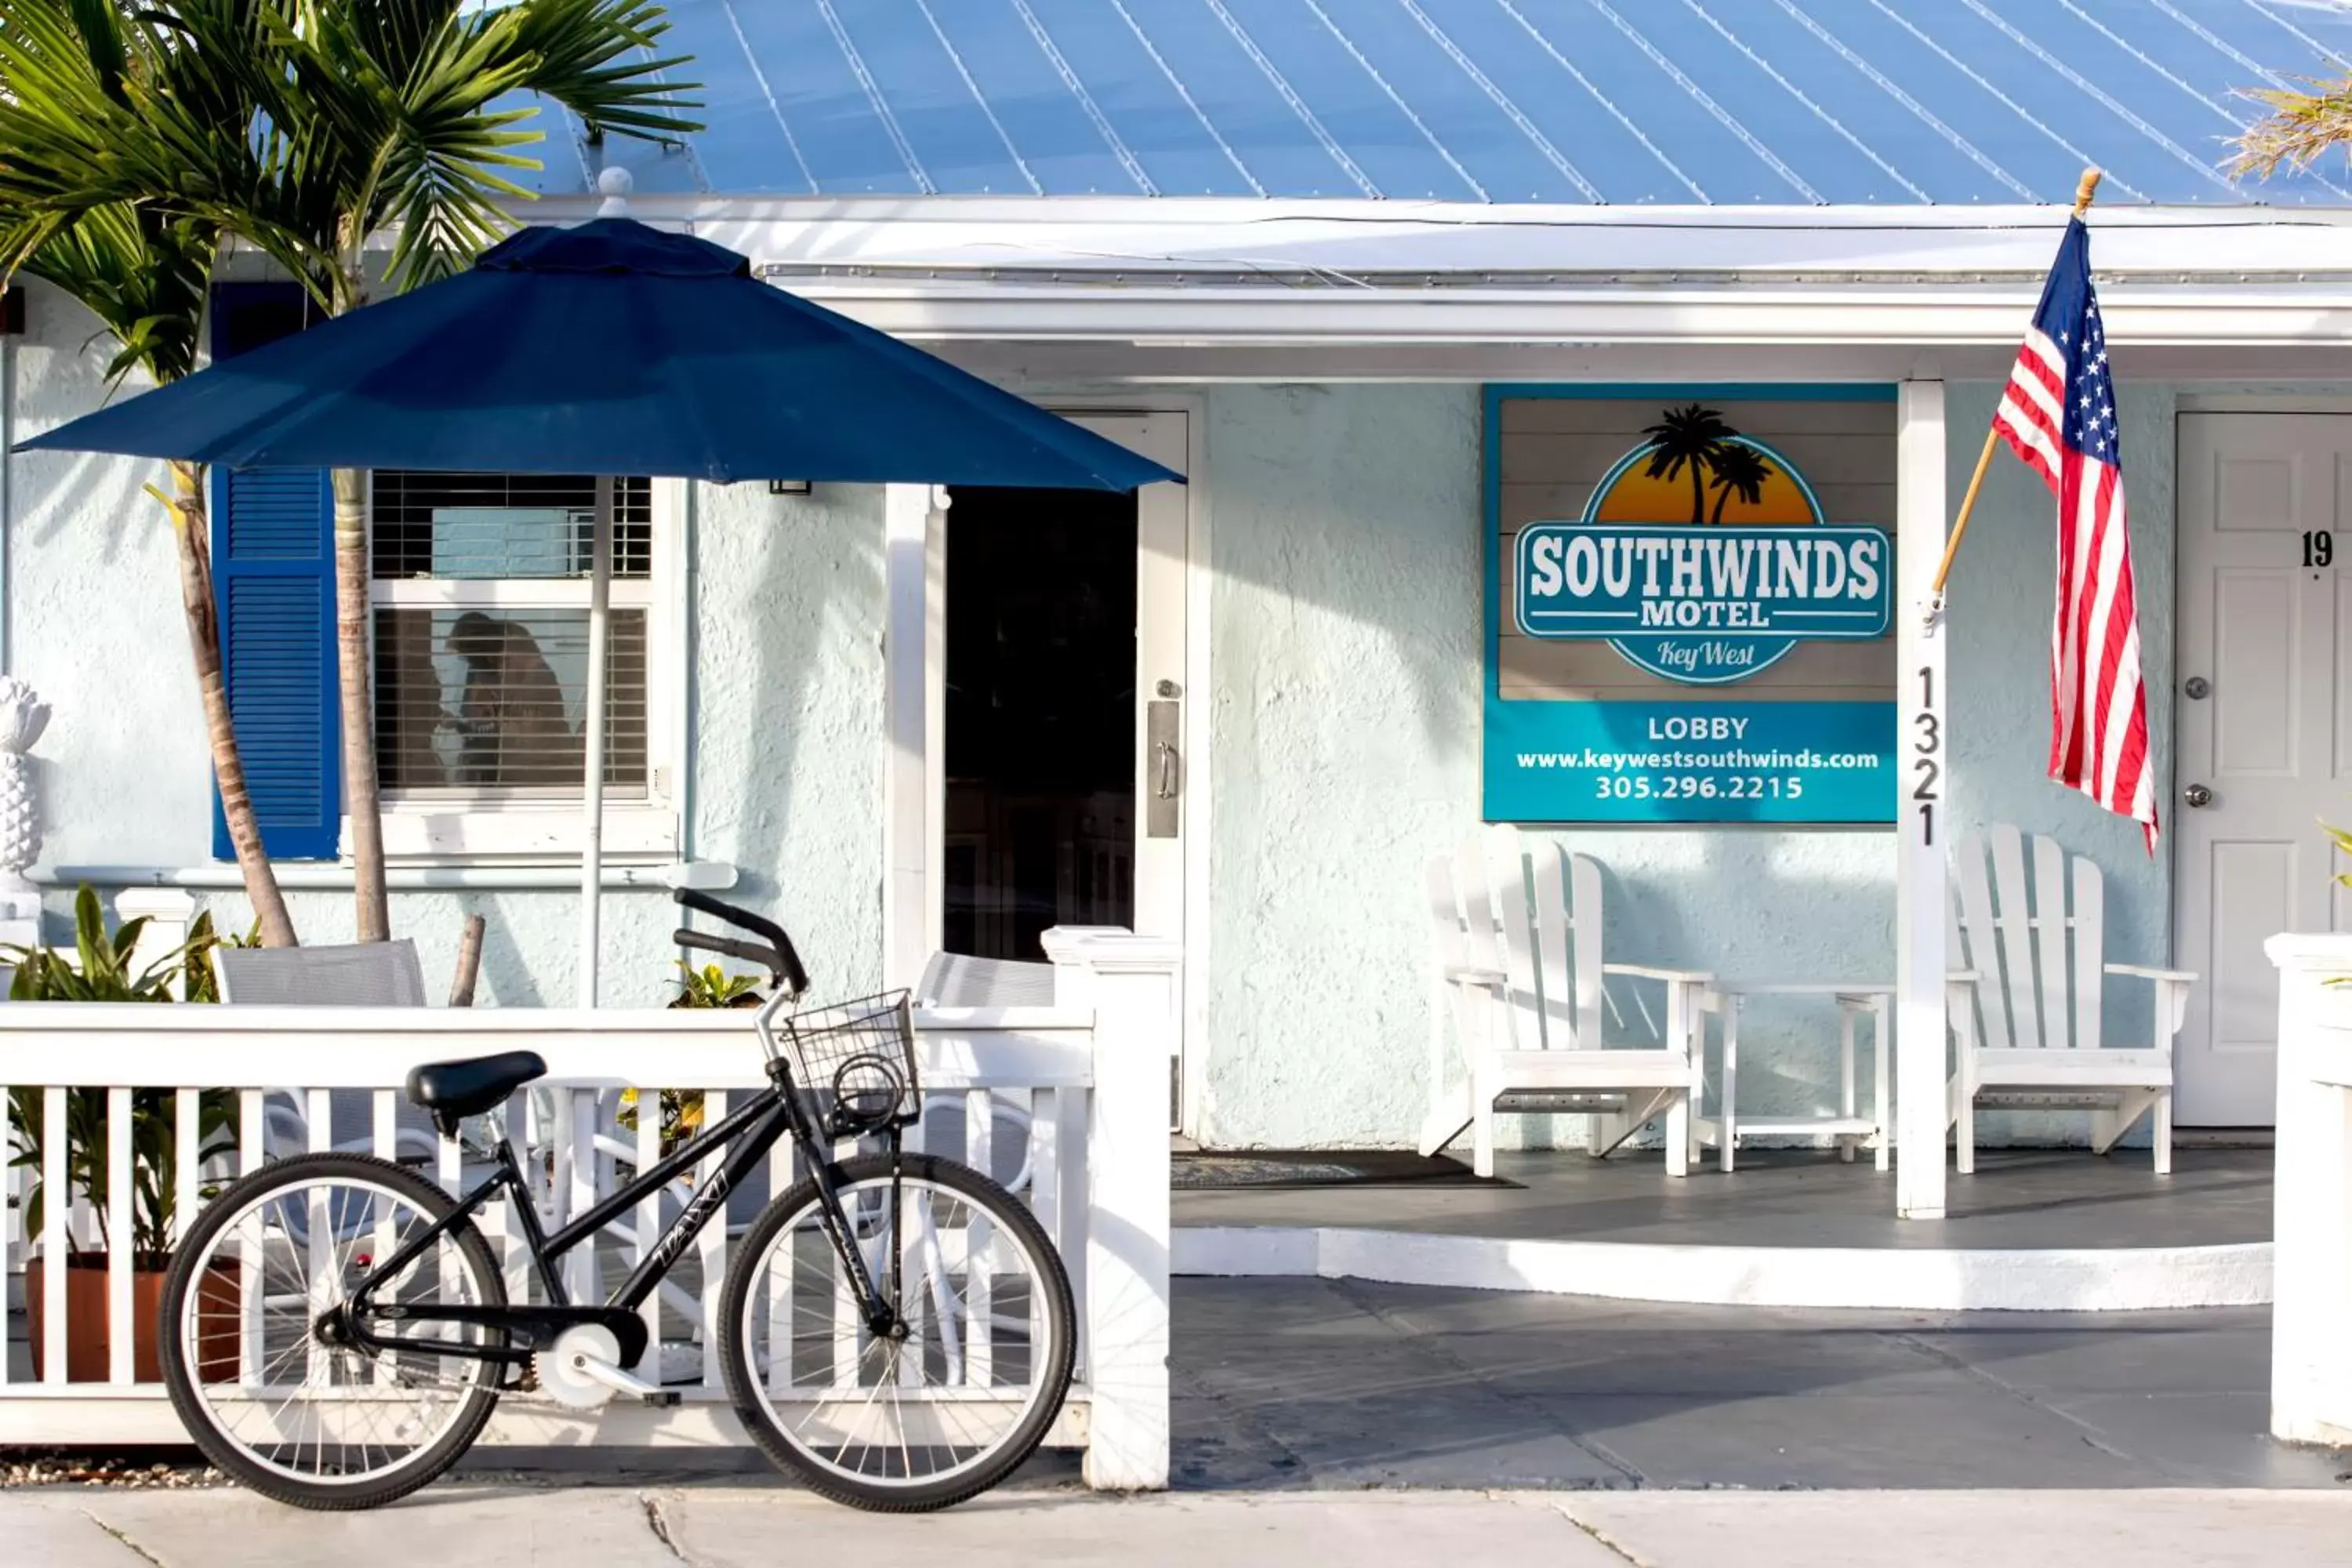 Property building in Southwinds Motel